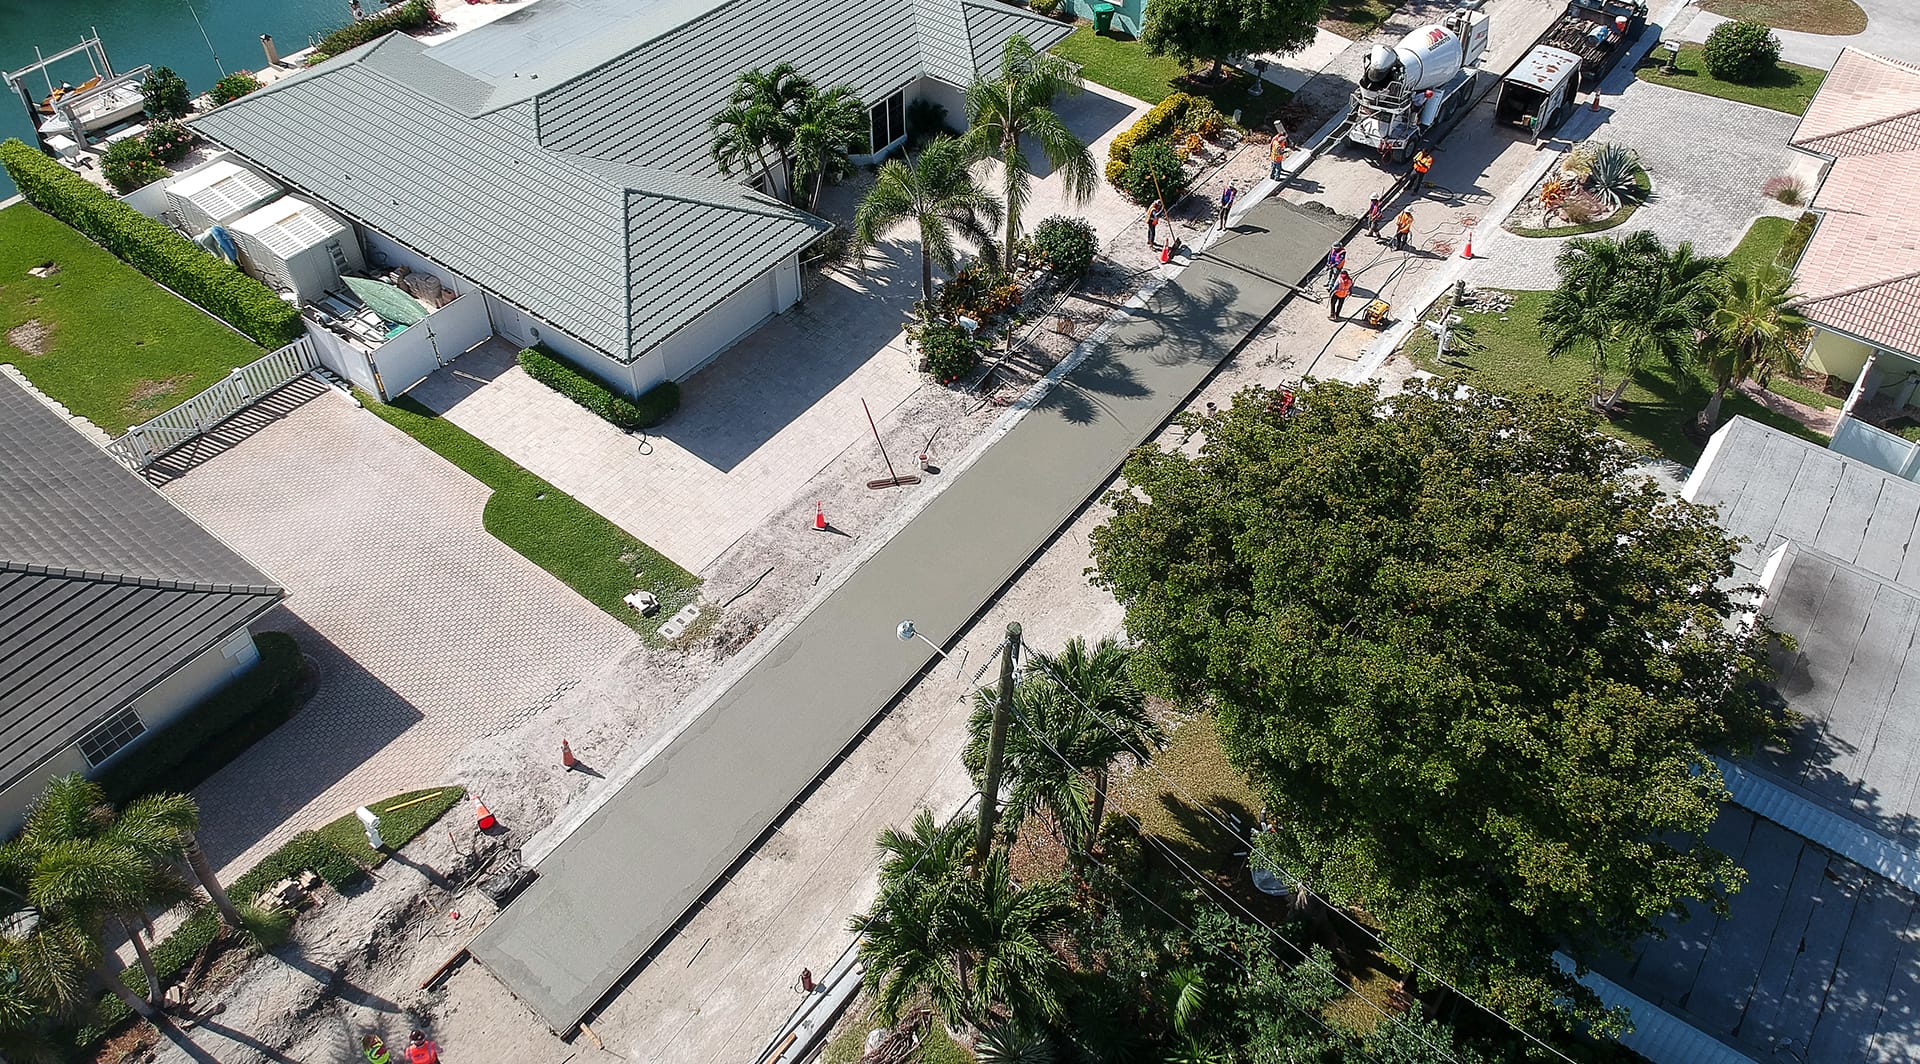 Singer Island Project Wins ACPA Special Recognition Award